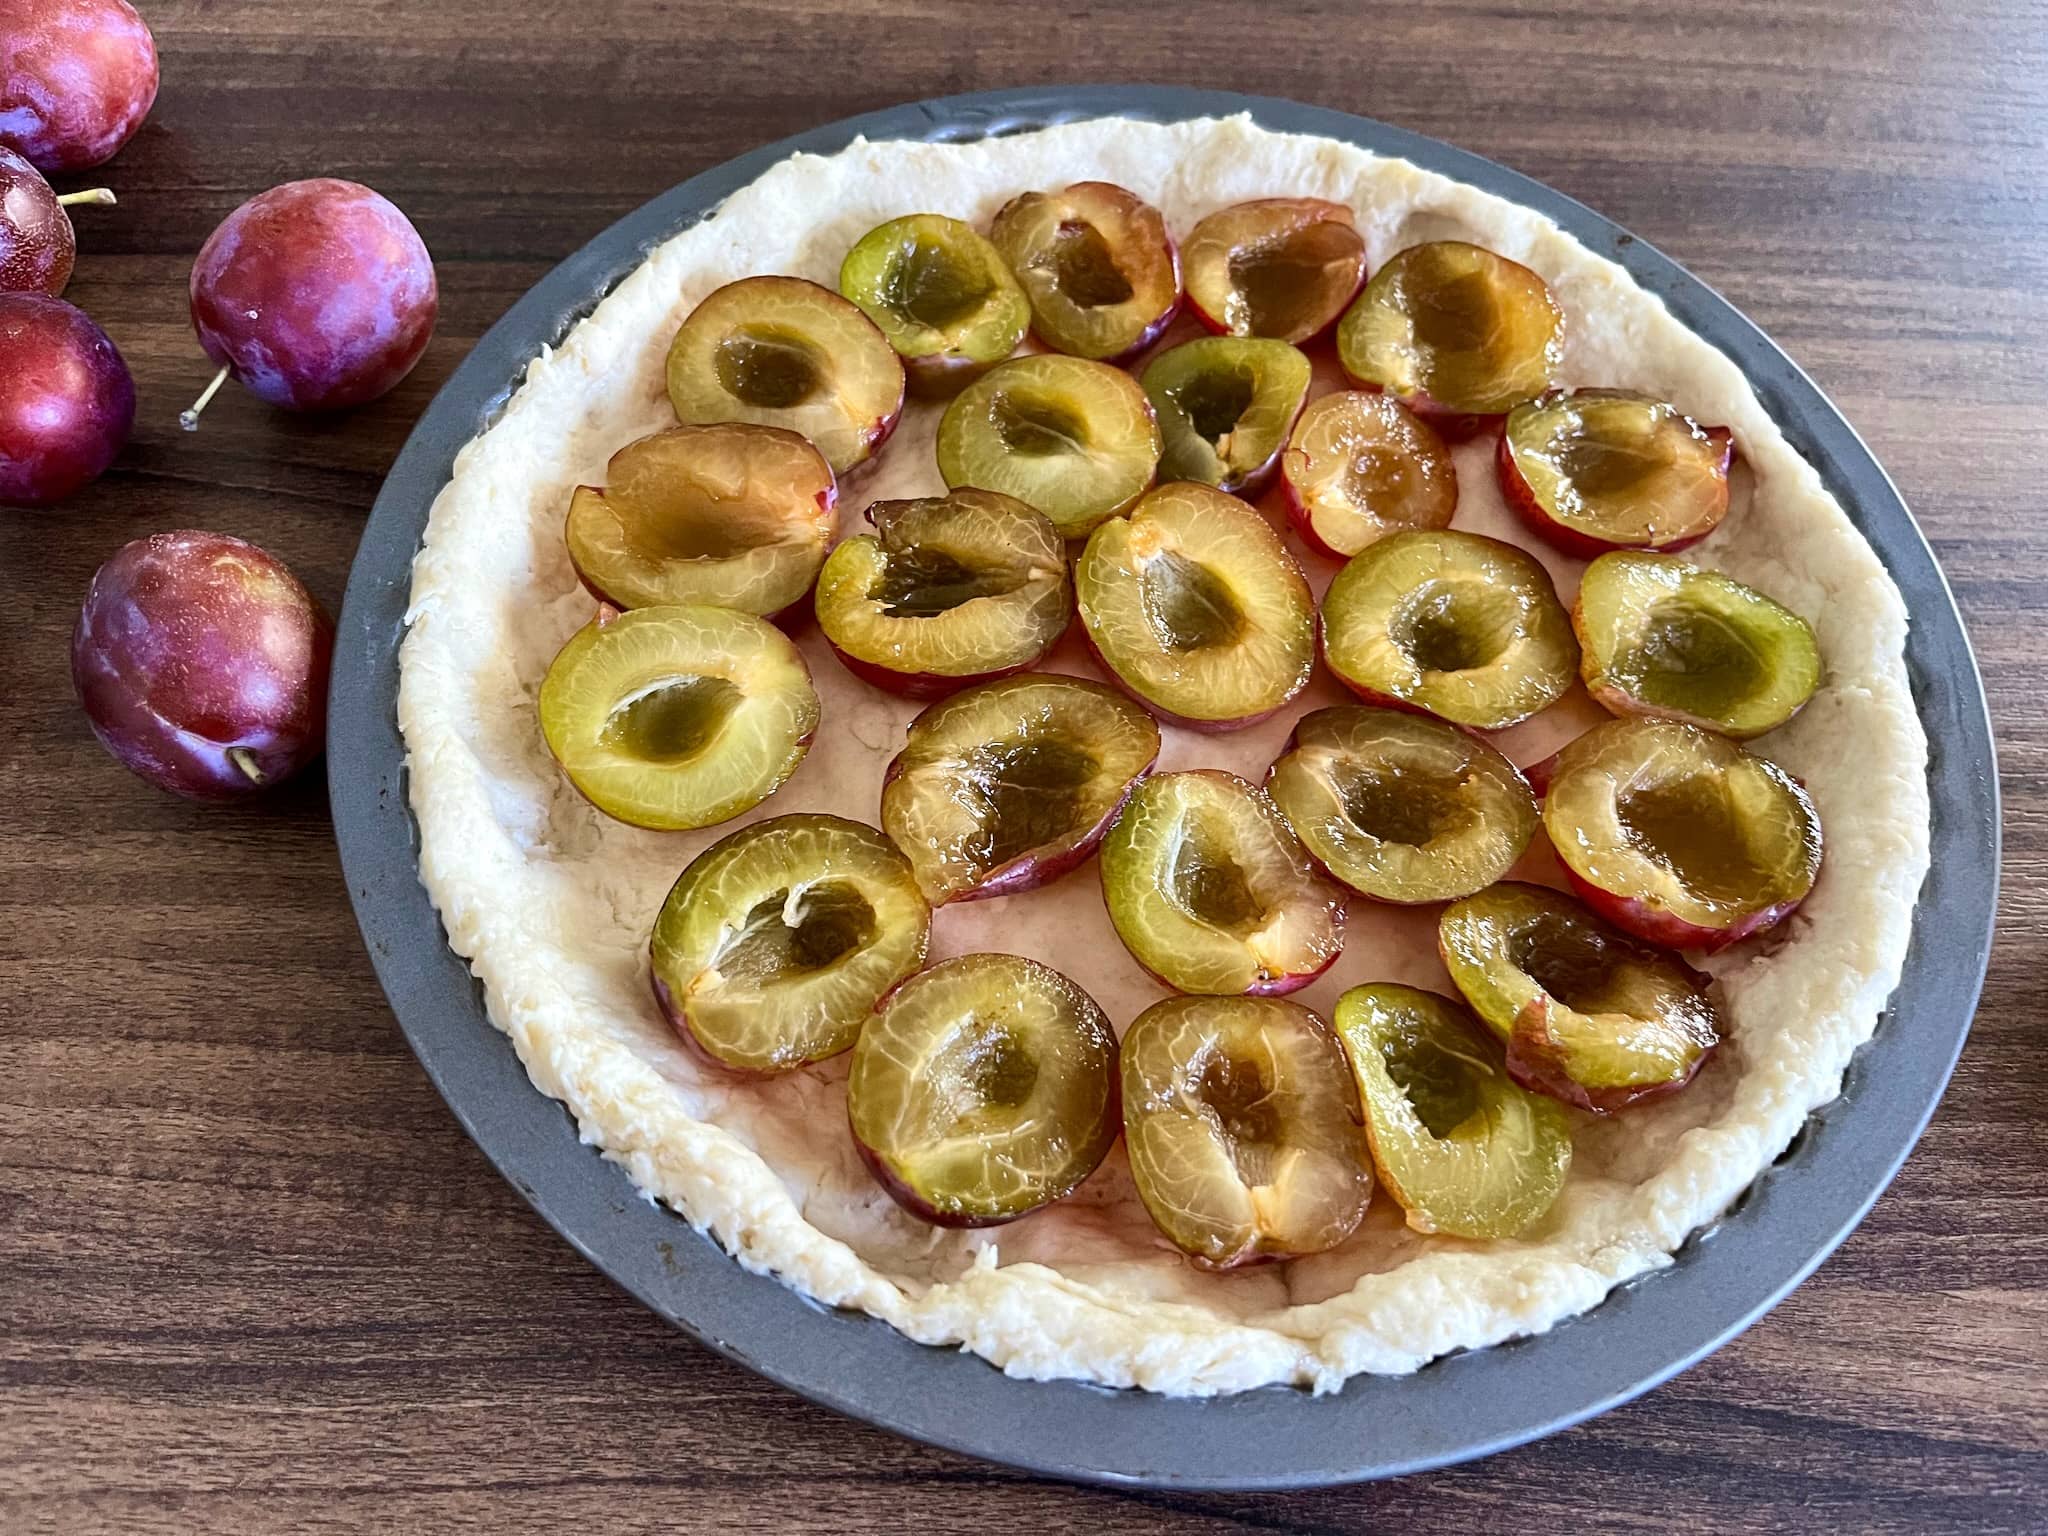 Neatly arranged plum halves on top of tart dough in a tray